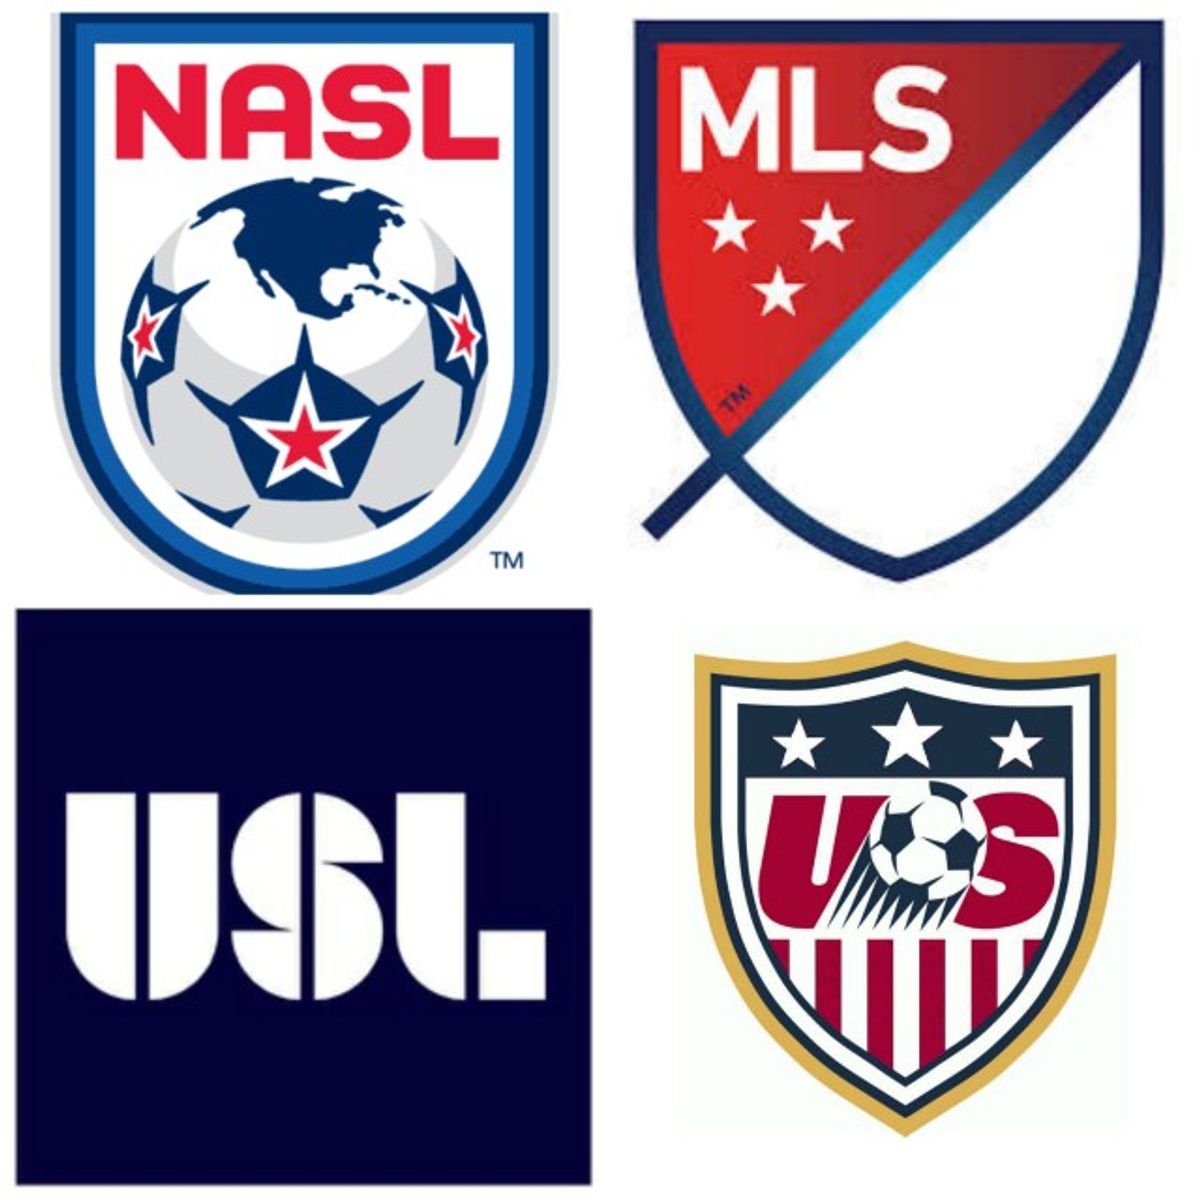 How can NASL co-exist with MLS?